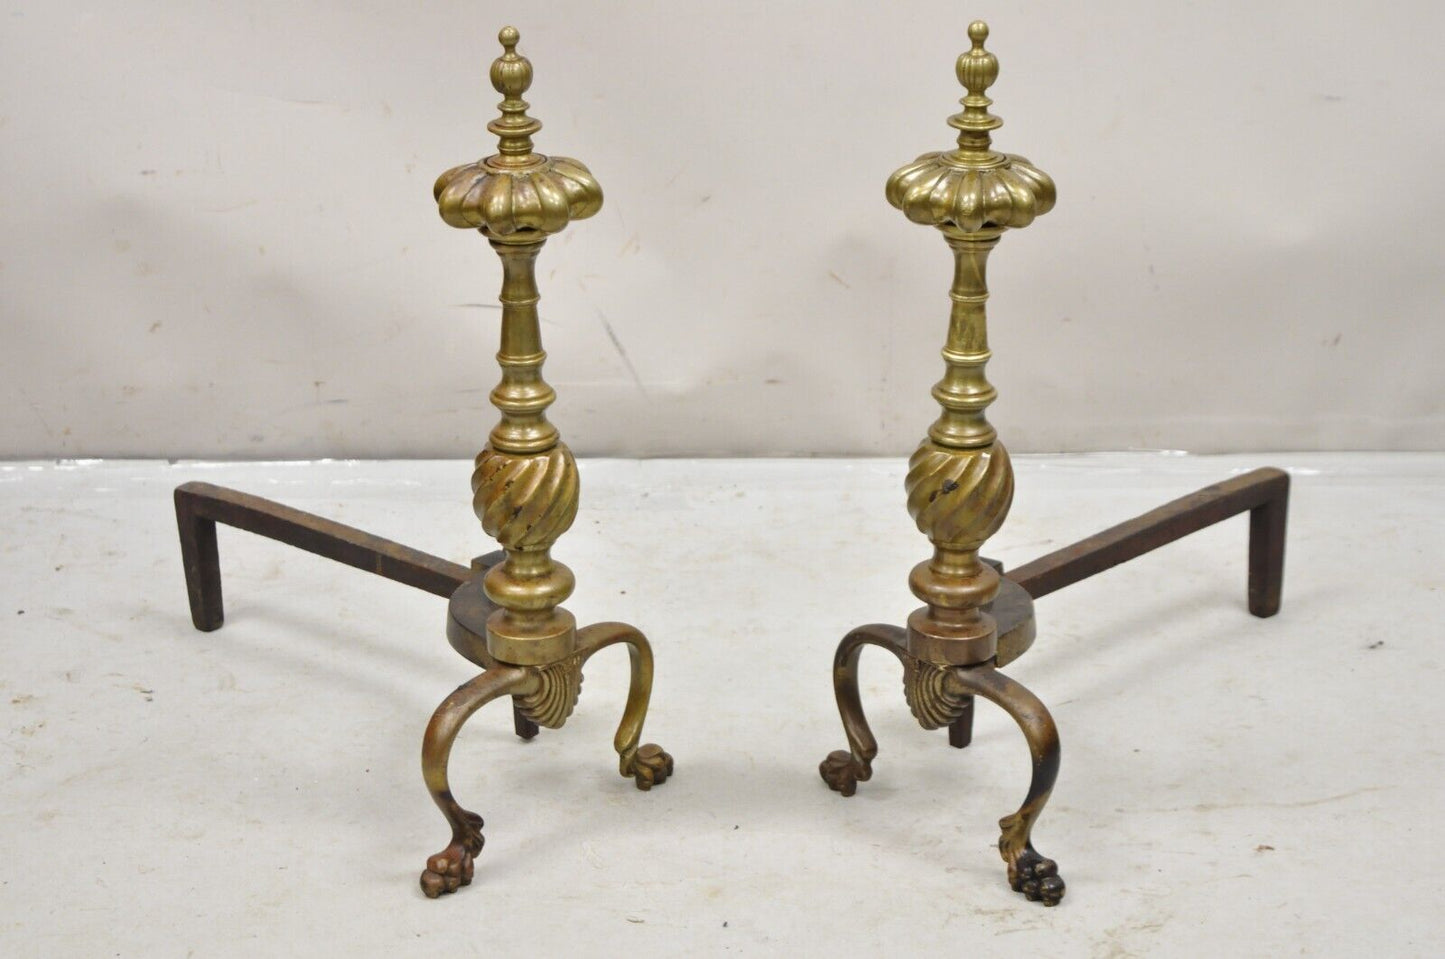 Antique French Empire Style Bronze Brass Spiral Column Andirons- a Pair